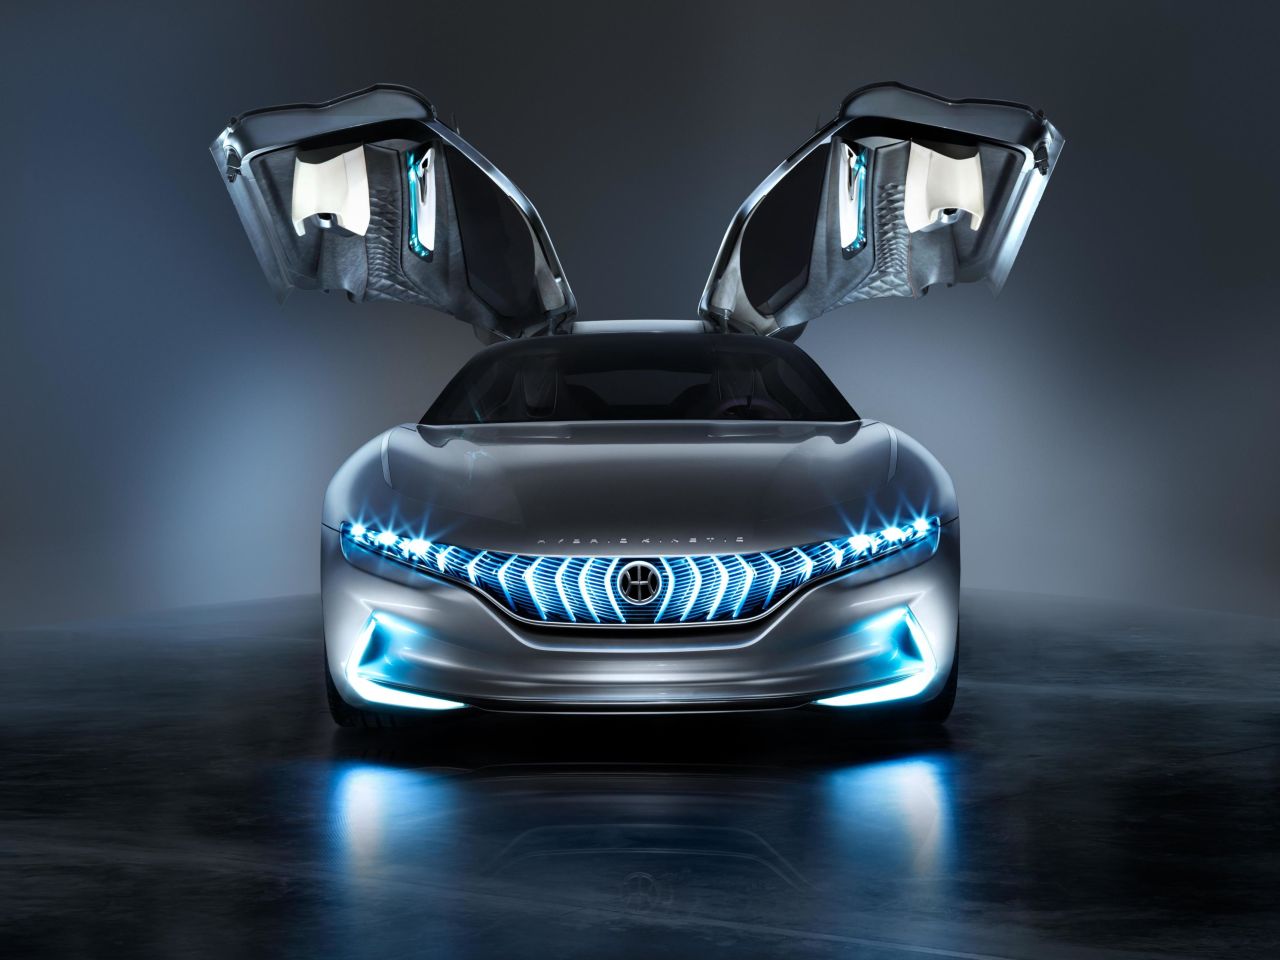 Pininfarina's brief was to create a glamorous flagship for the Hybrid Kinetic Group brand -- and the concept's spectacular gullwing doors certainly helps with this.